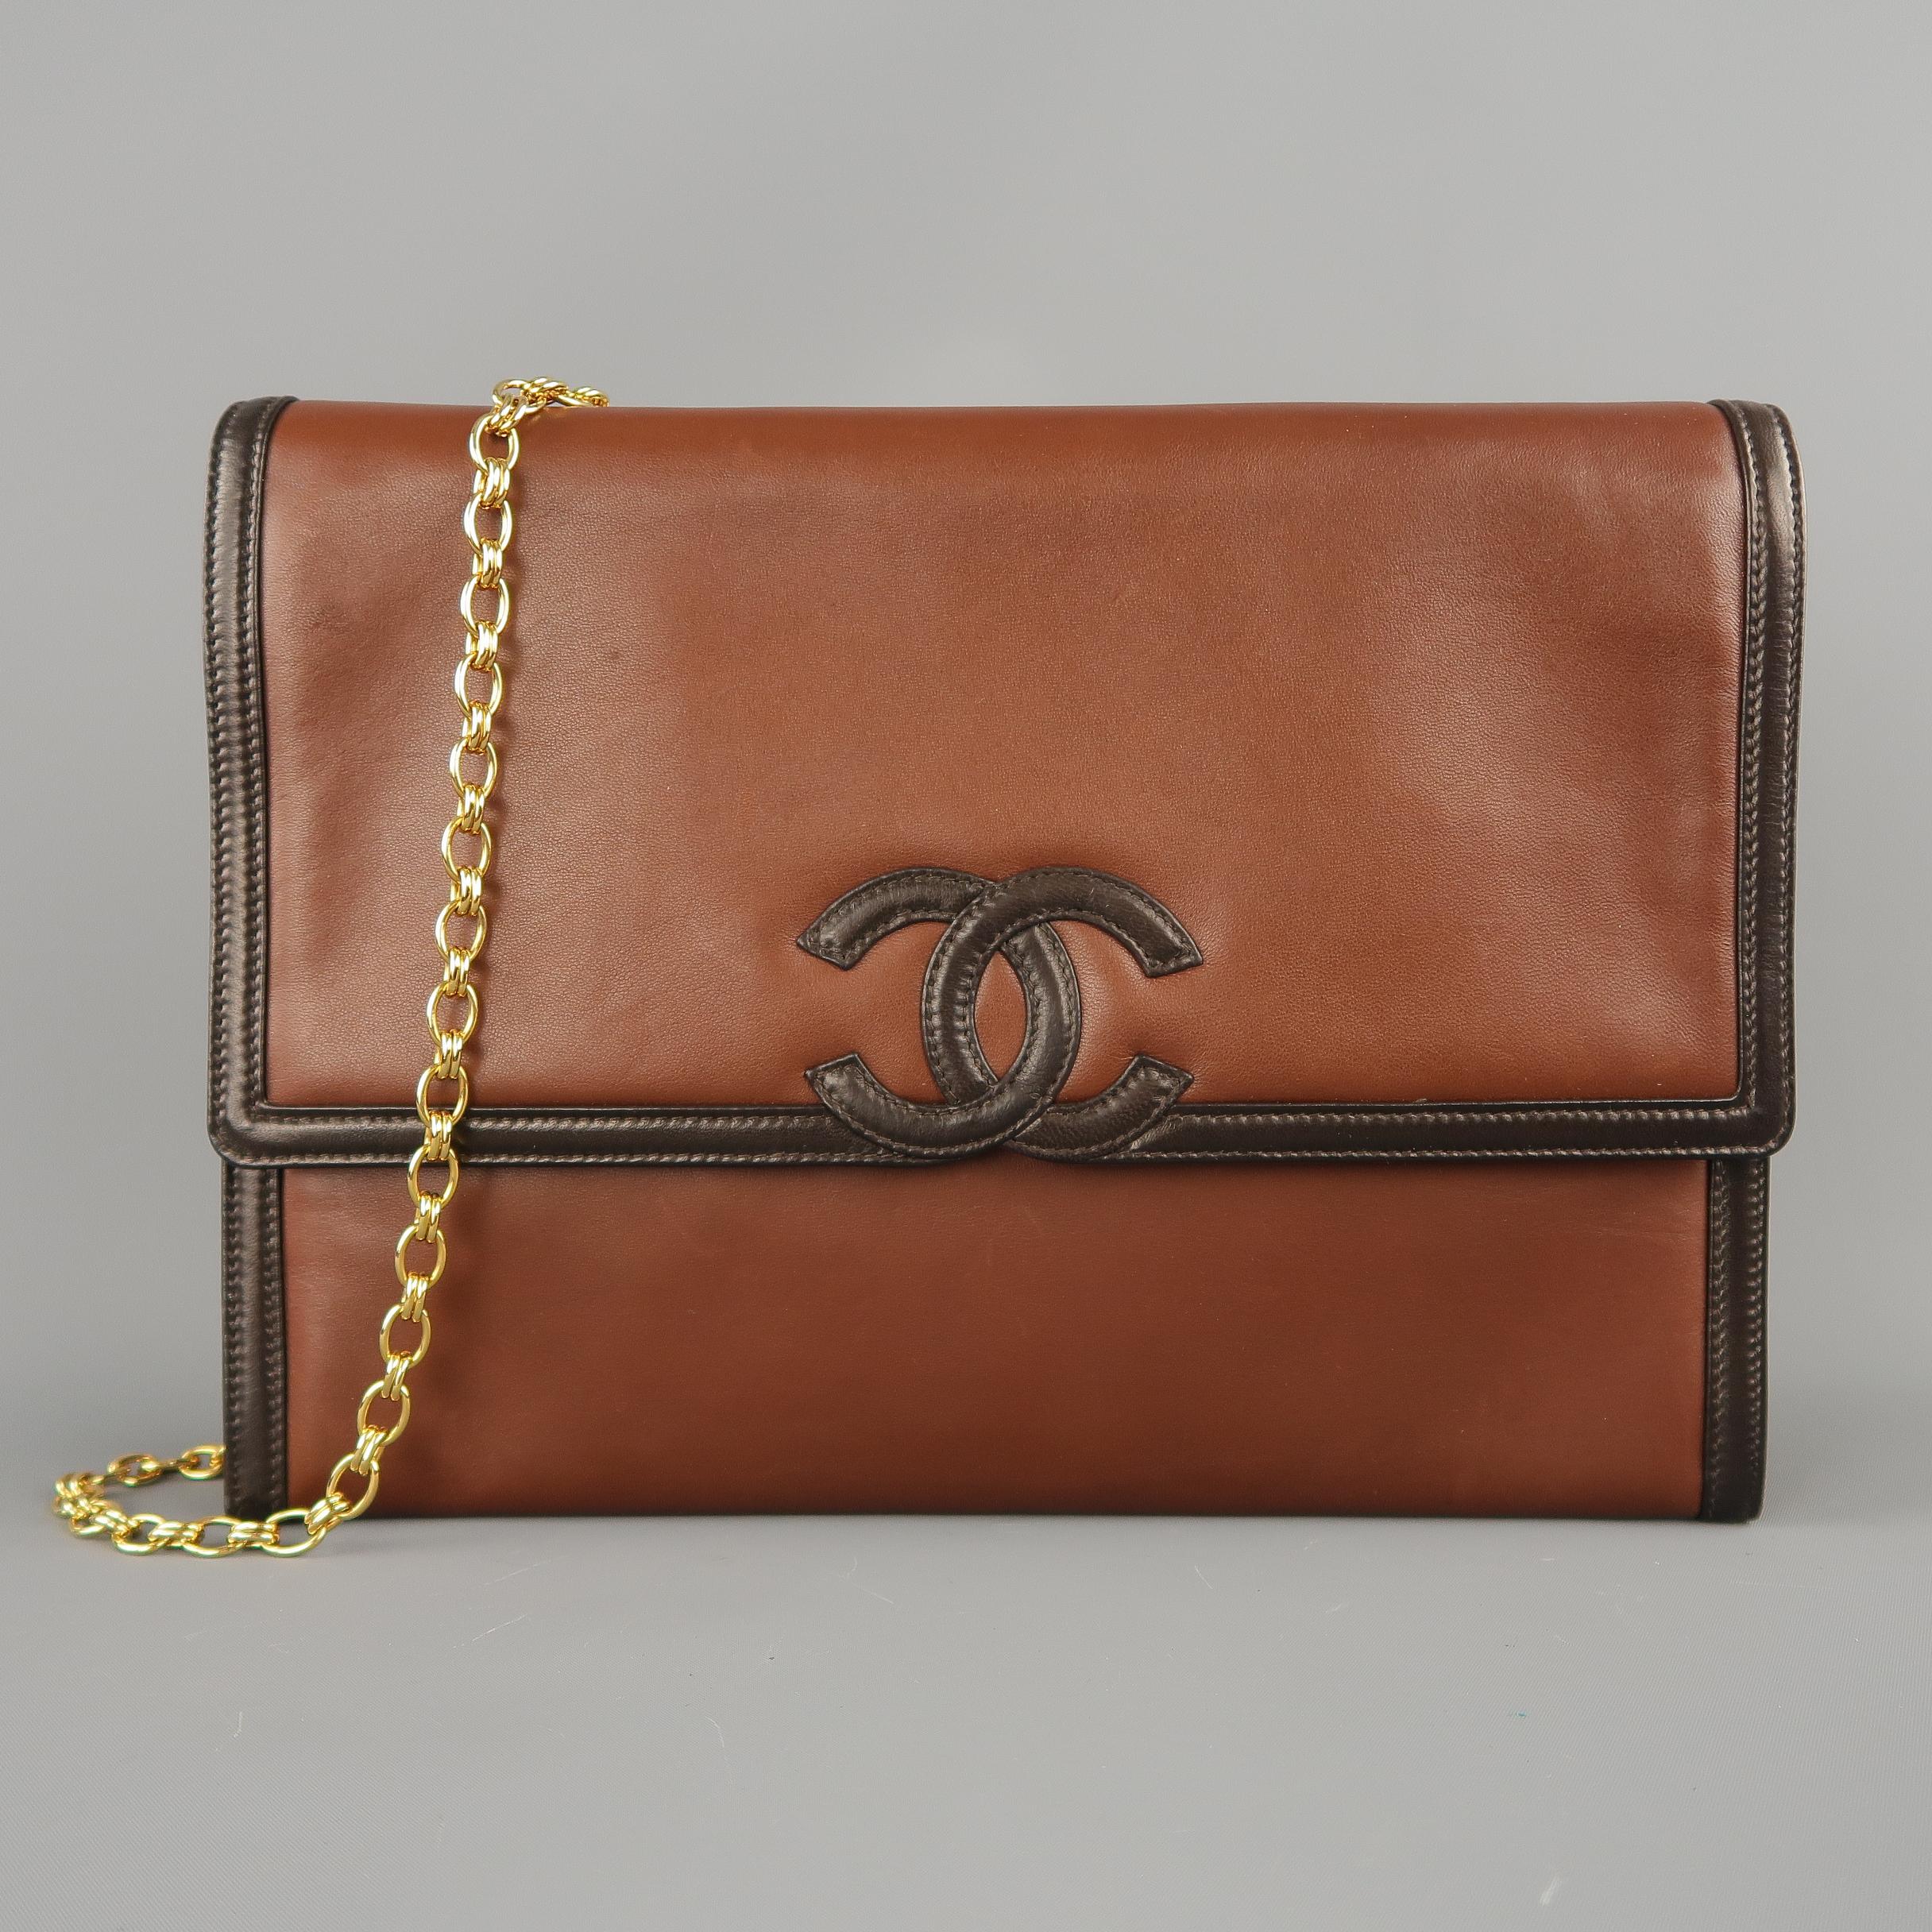 This rare vintage 1980's Chanel handbag comes in smooth brown leather in a classic rectangular shape with a top flap closure, yellow gold tone chain strap, dark brown leather piping and CC logo, and leather interior with pockets. Gifted by The